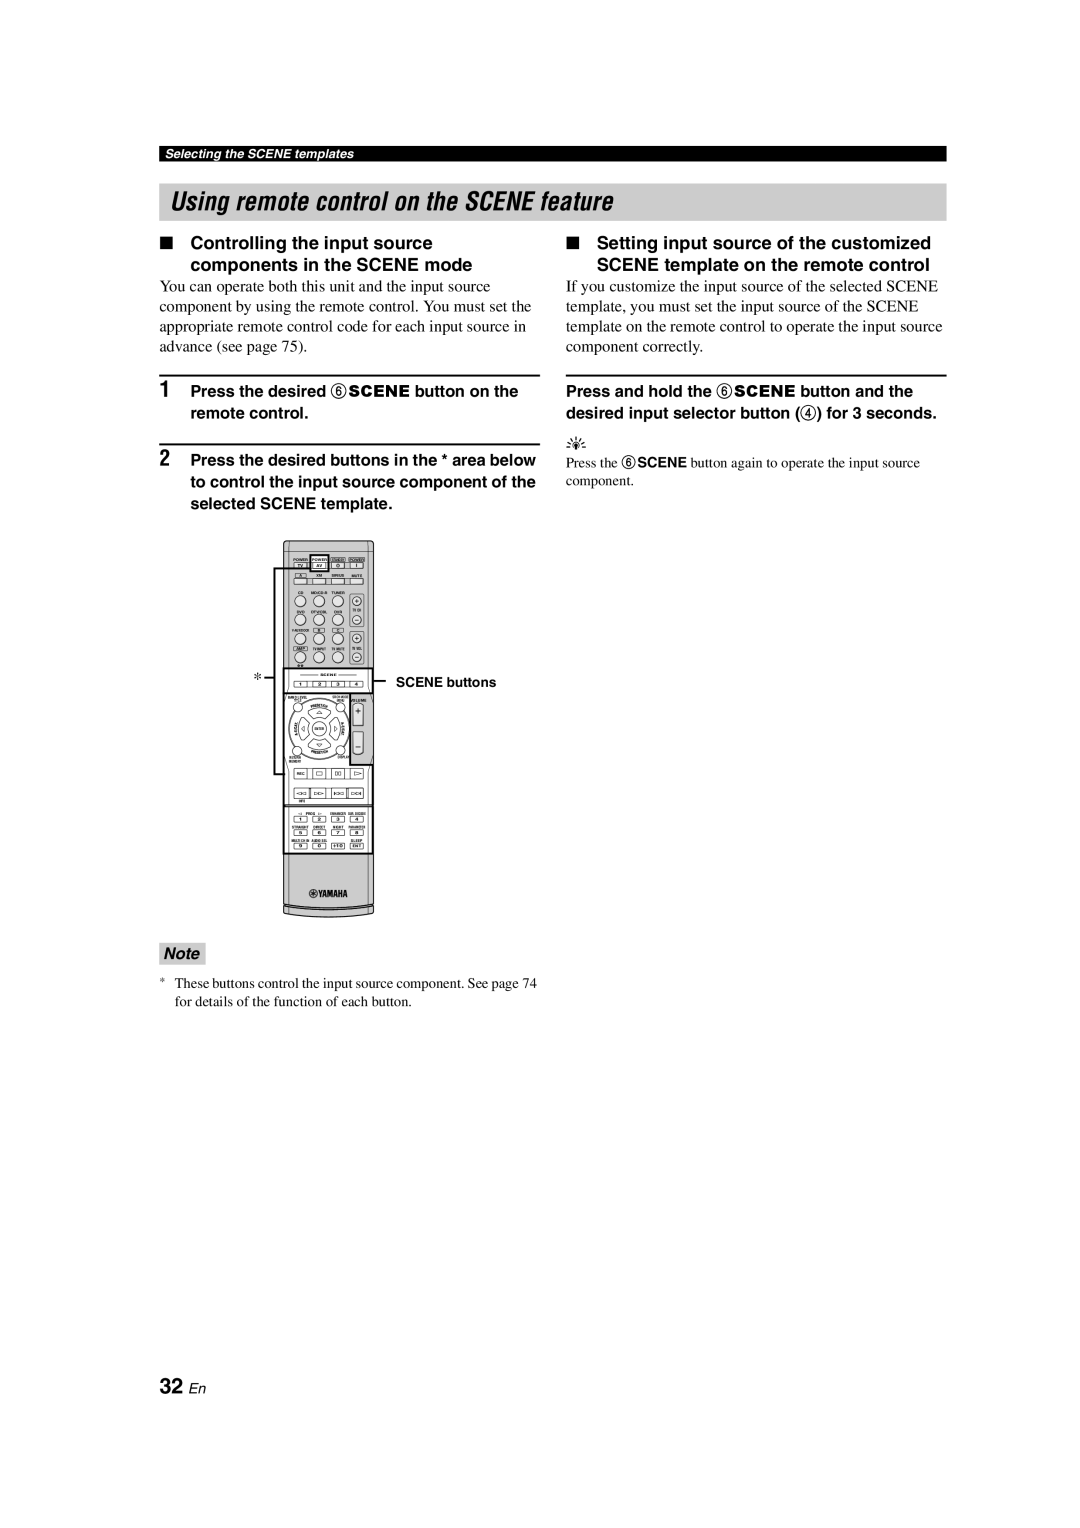 Yamaha HTR-6140 owner manual Using remote control on the SCENE feature, 32 En, Controlling the input source 